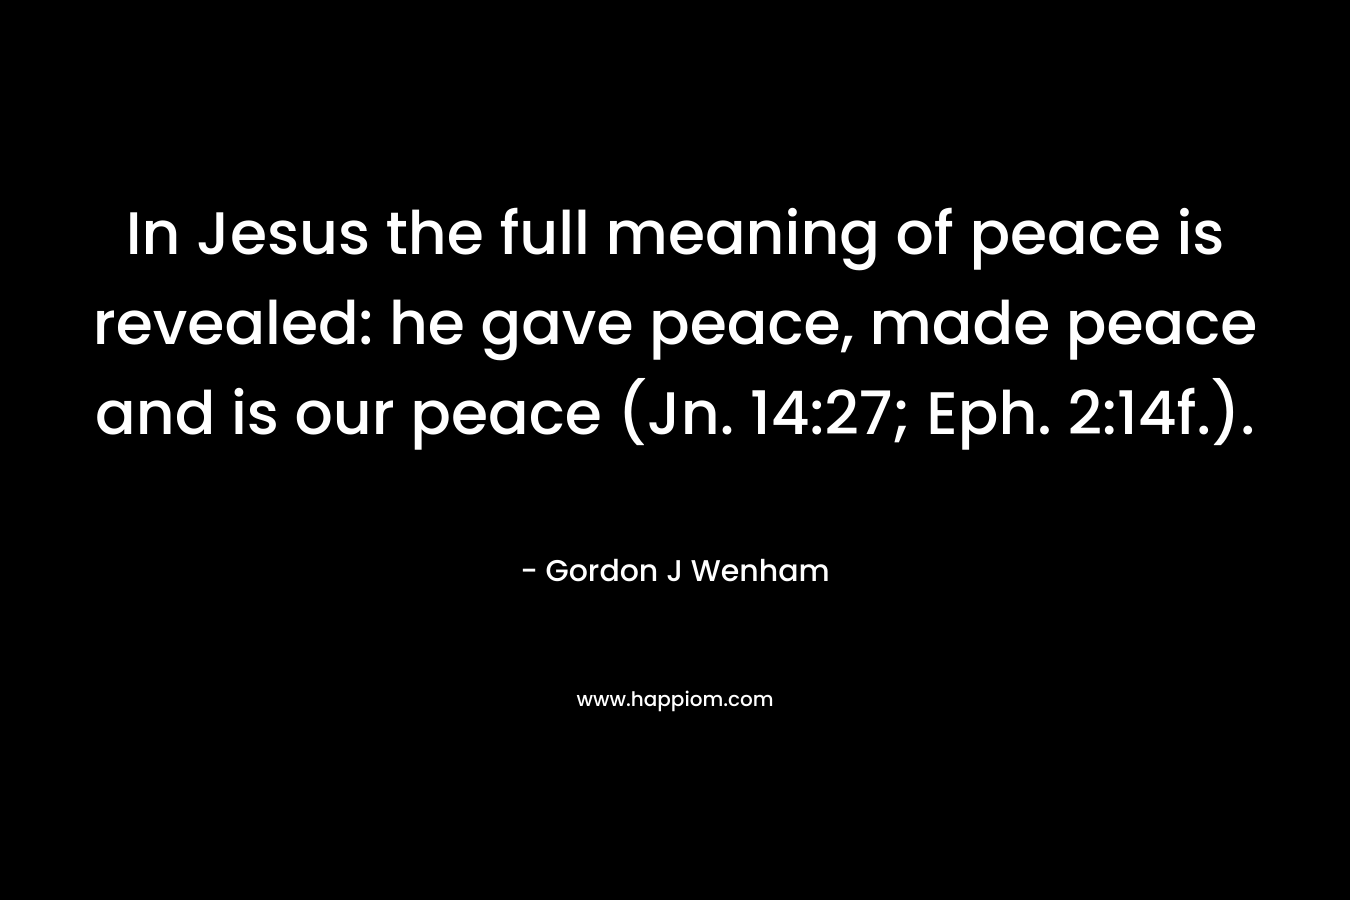 In Jesus the full meaning of peace is revealed: he gave peace, made peace and is our peace (Jn. 14:27; Eph. 2:14f.).